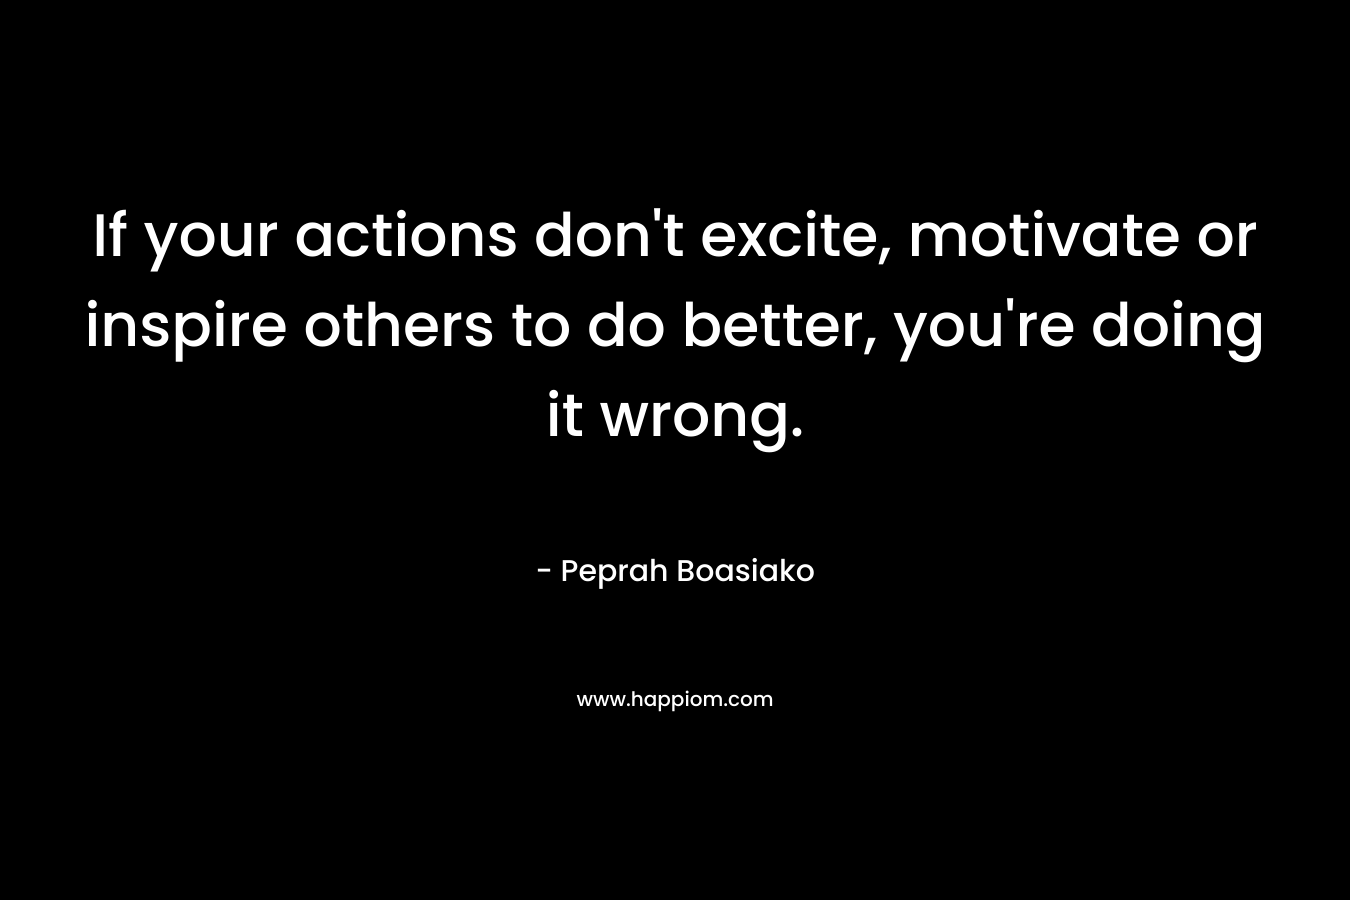 If your actions don't excite, motivate or inspire others to do better, you're doing it wrong.